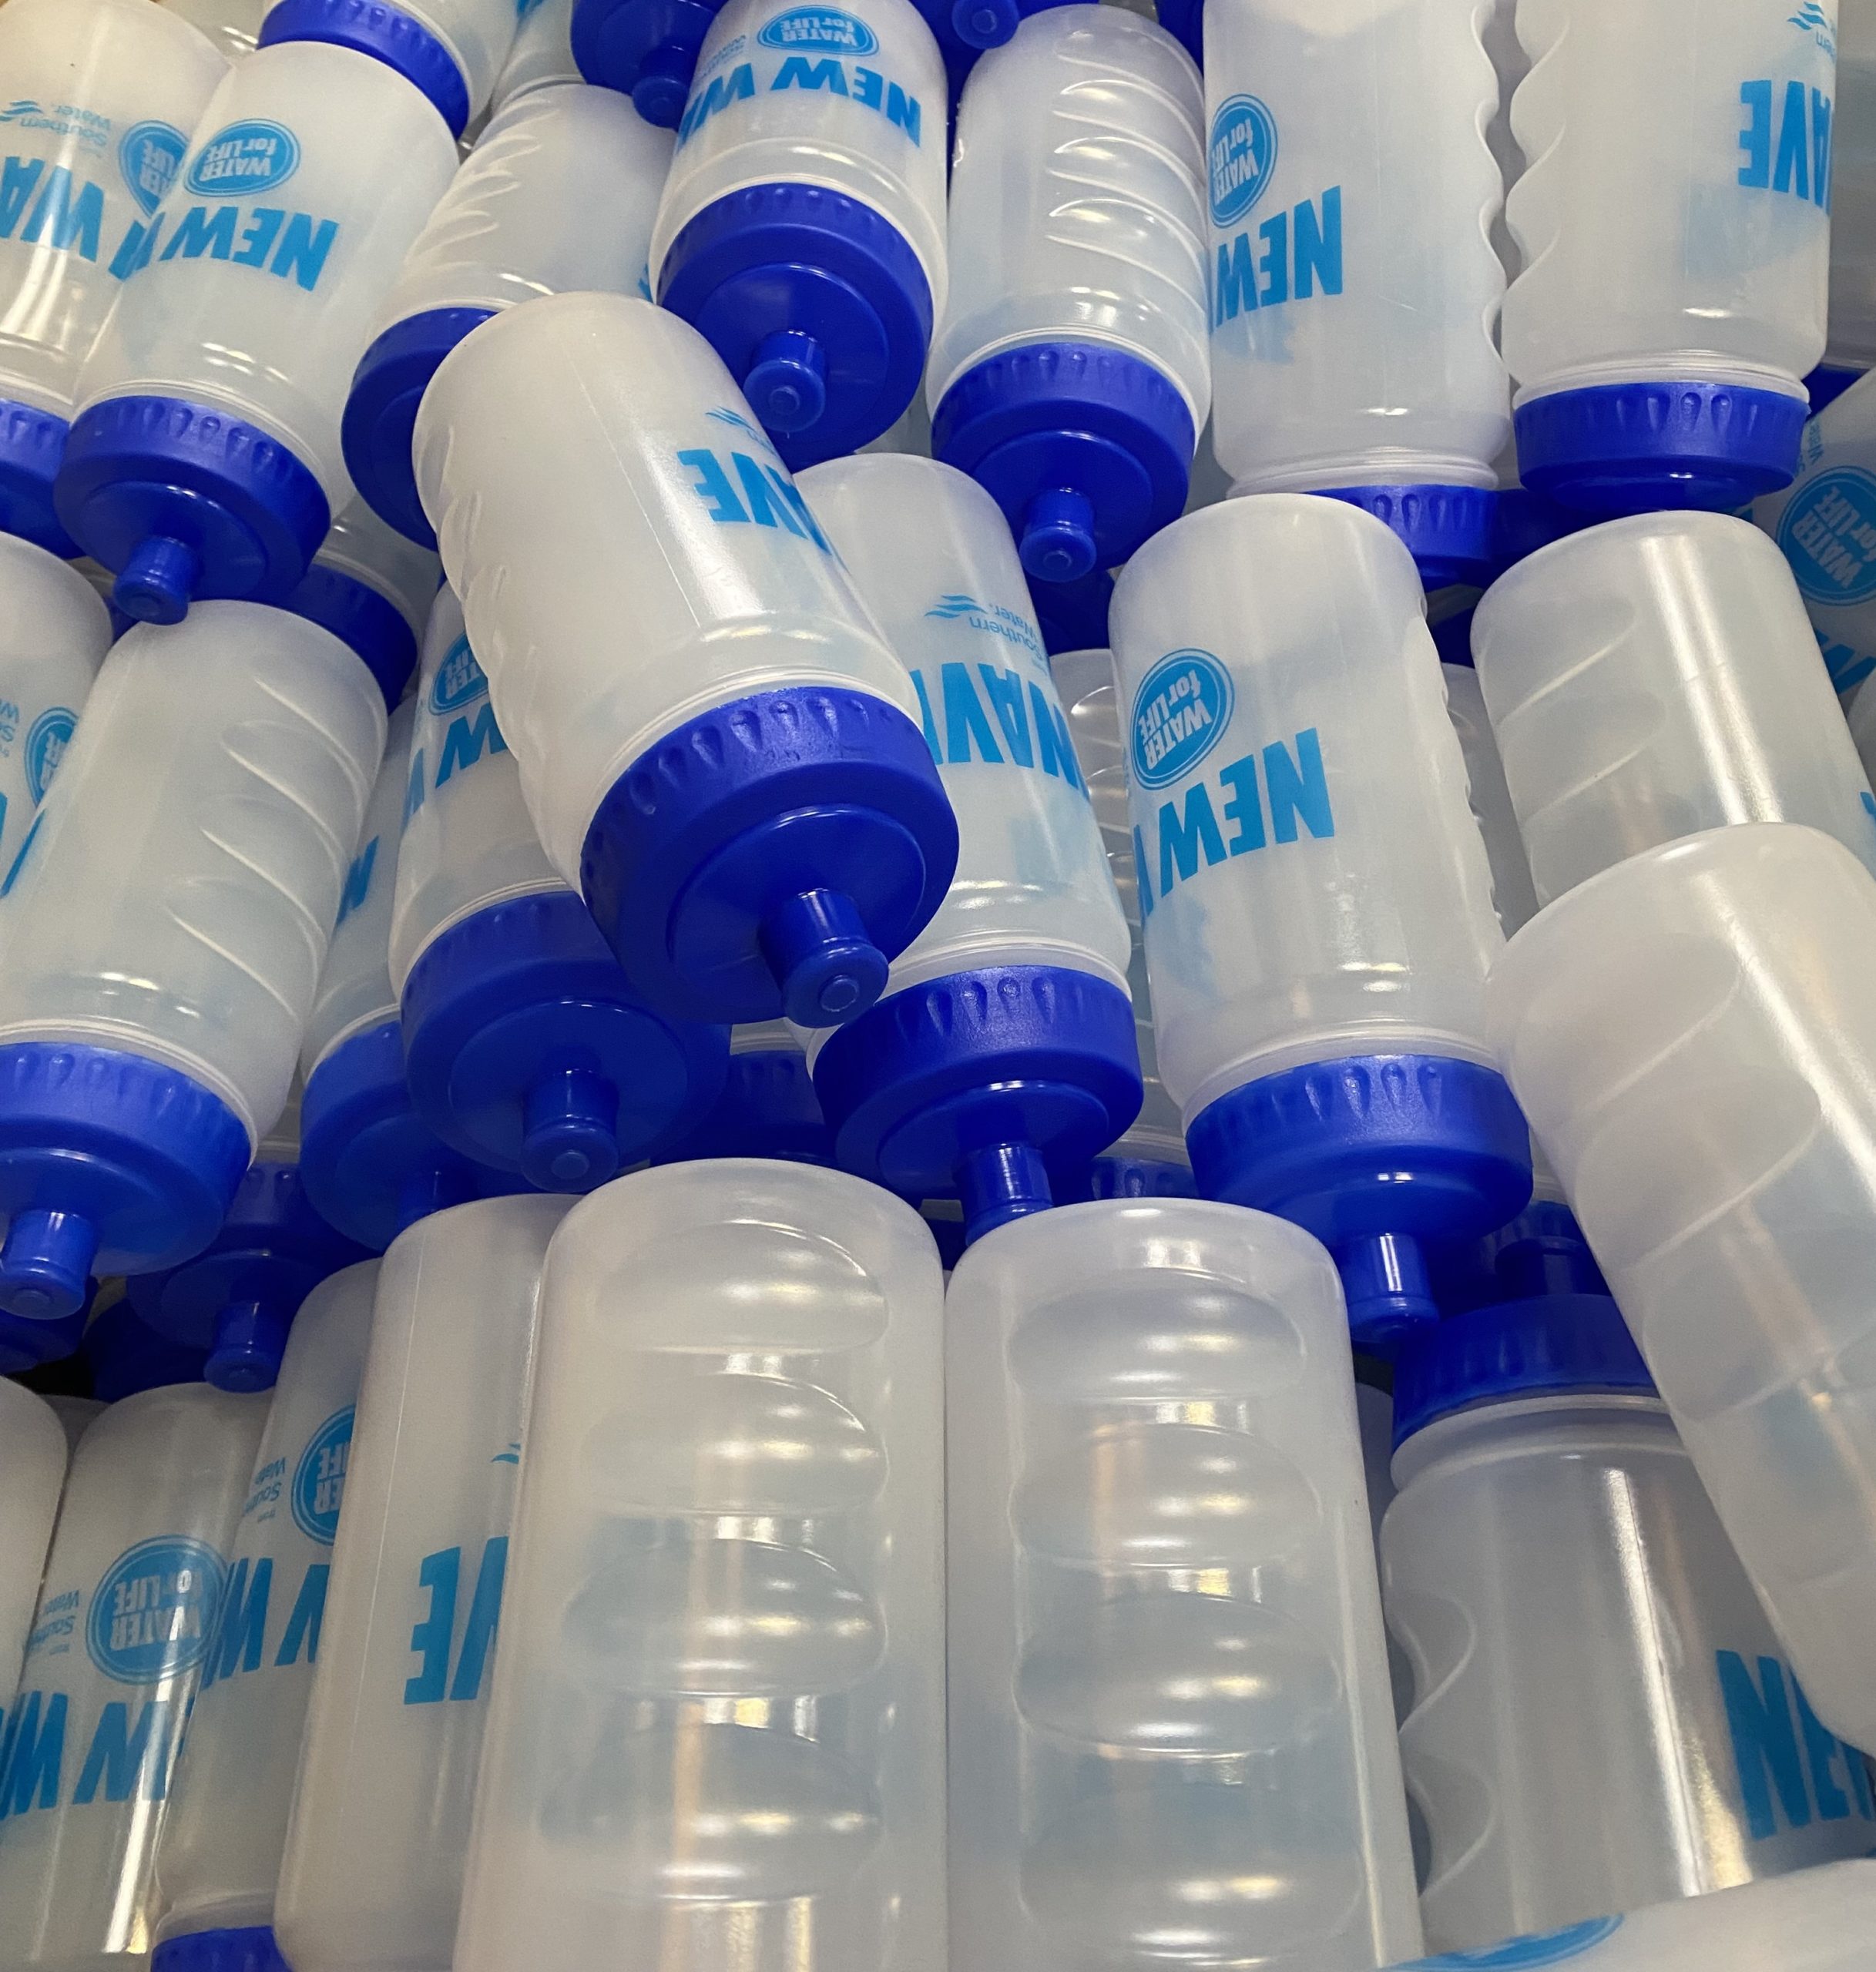 close up view of multiple clear water bottles with blue caps